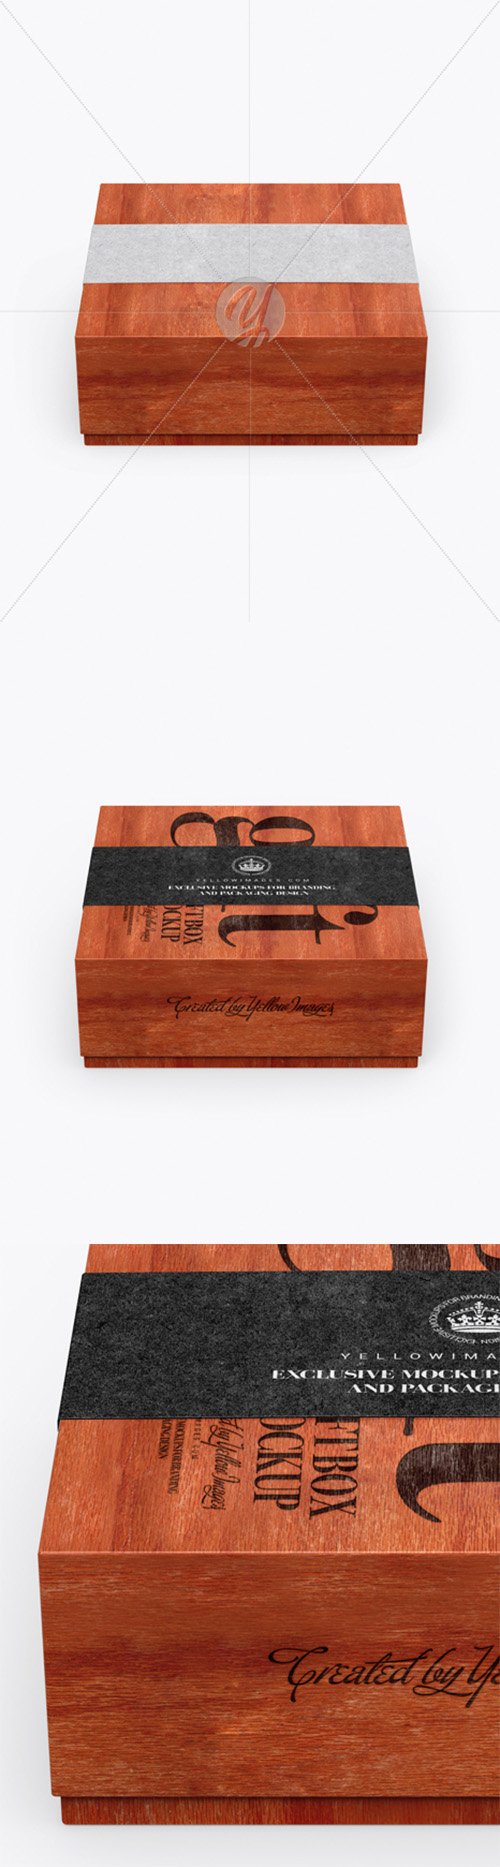 Red Wooden Box with Label Mockup (High-Angle Shot) 24542 TIF